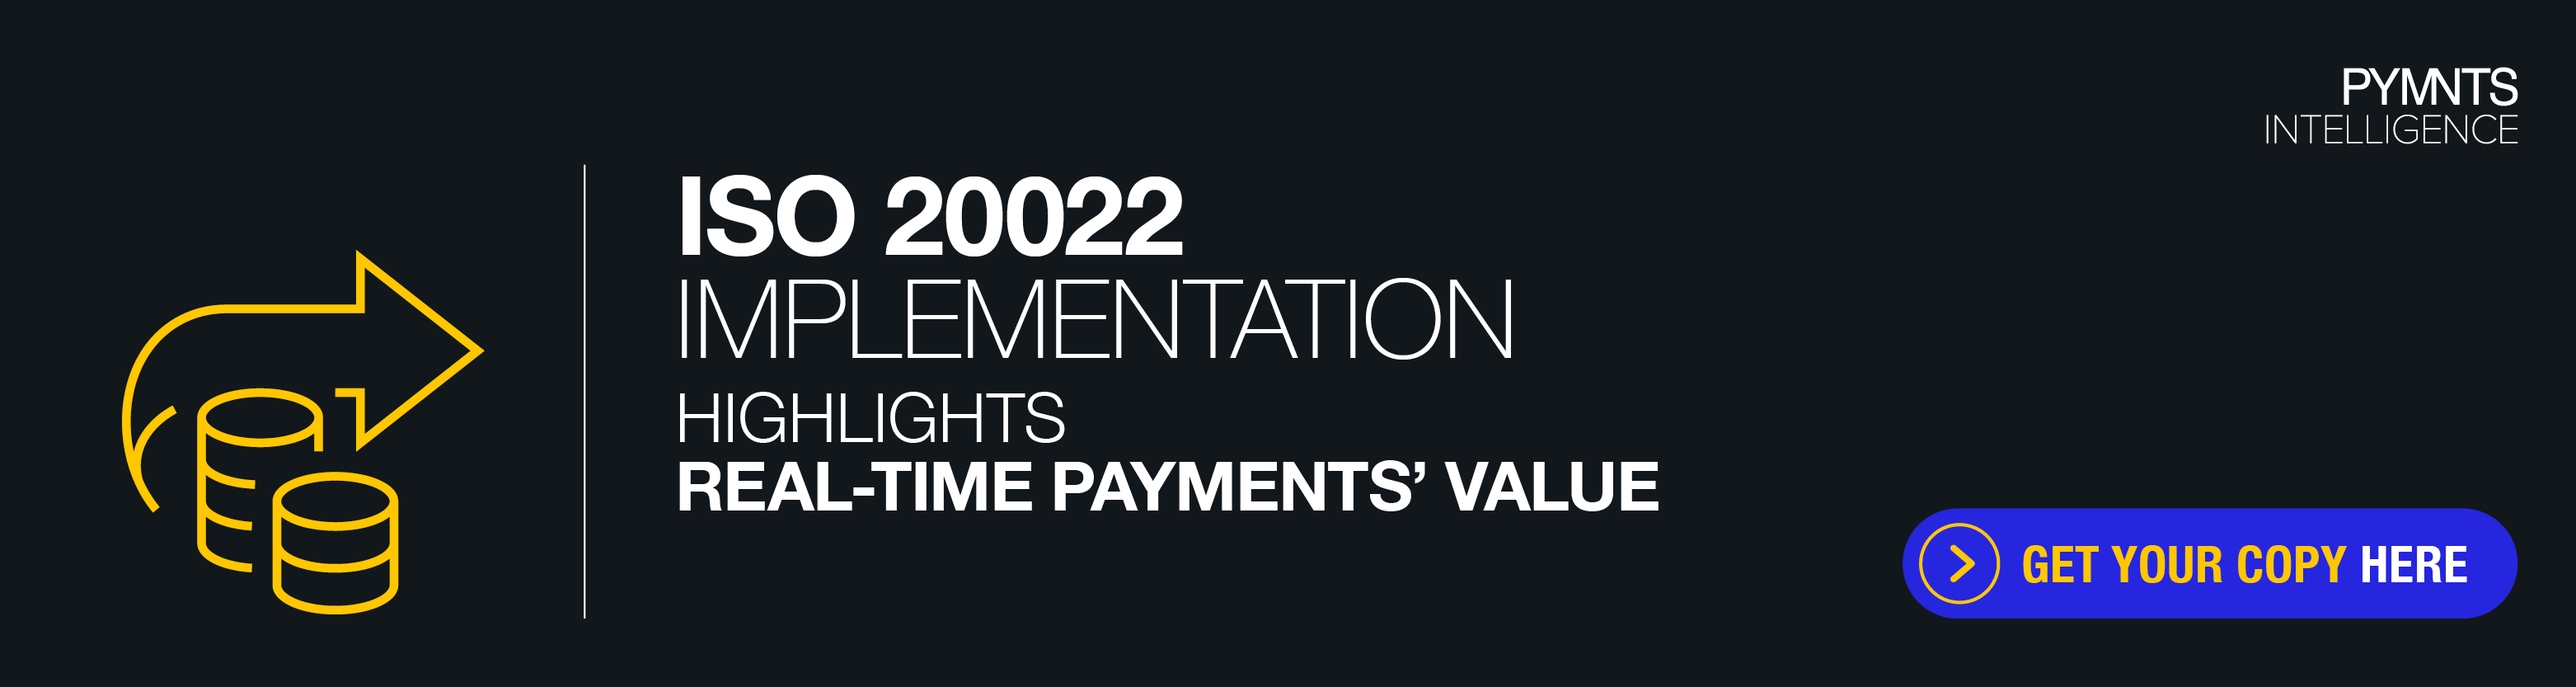 ACI ISO 20022 Real-Time Payments October 2023 Banner